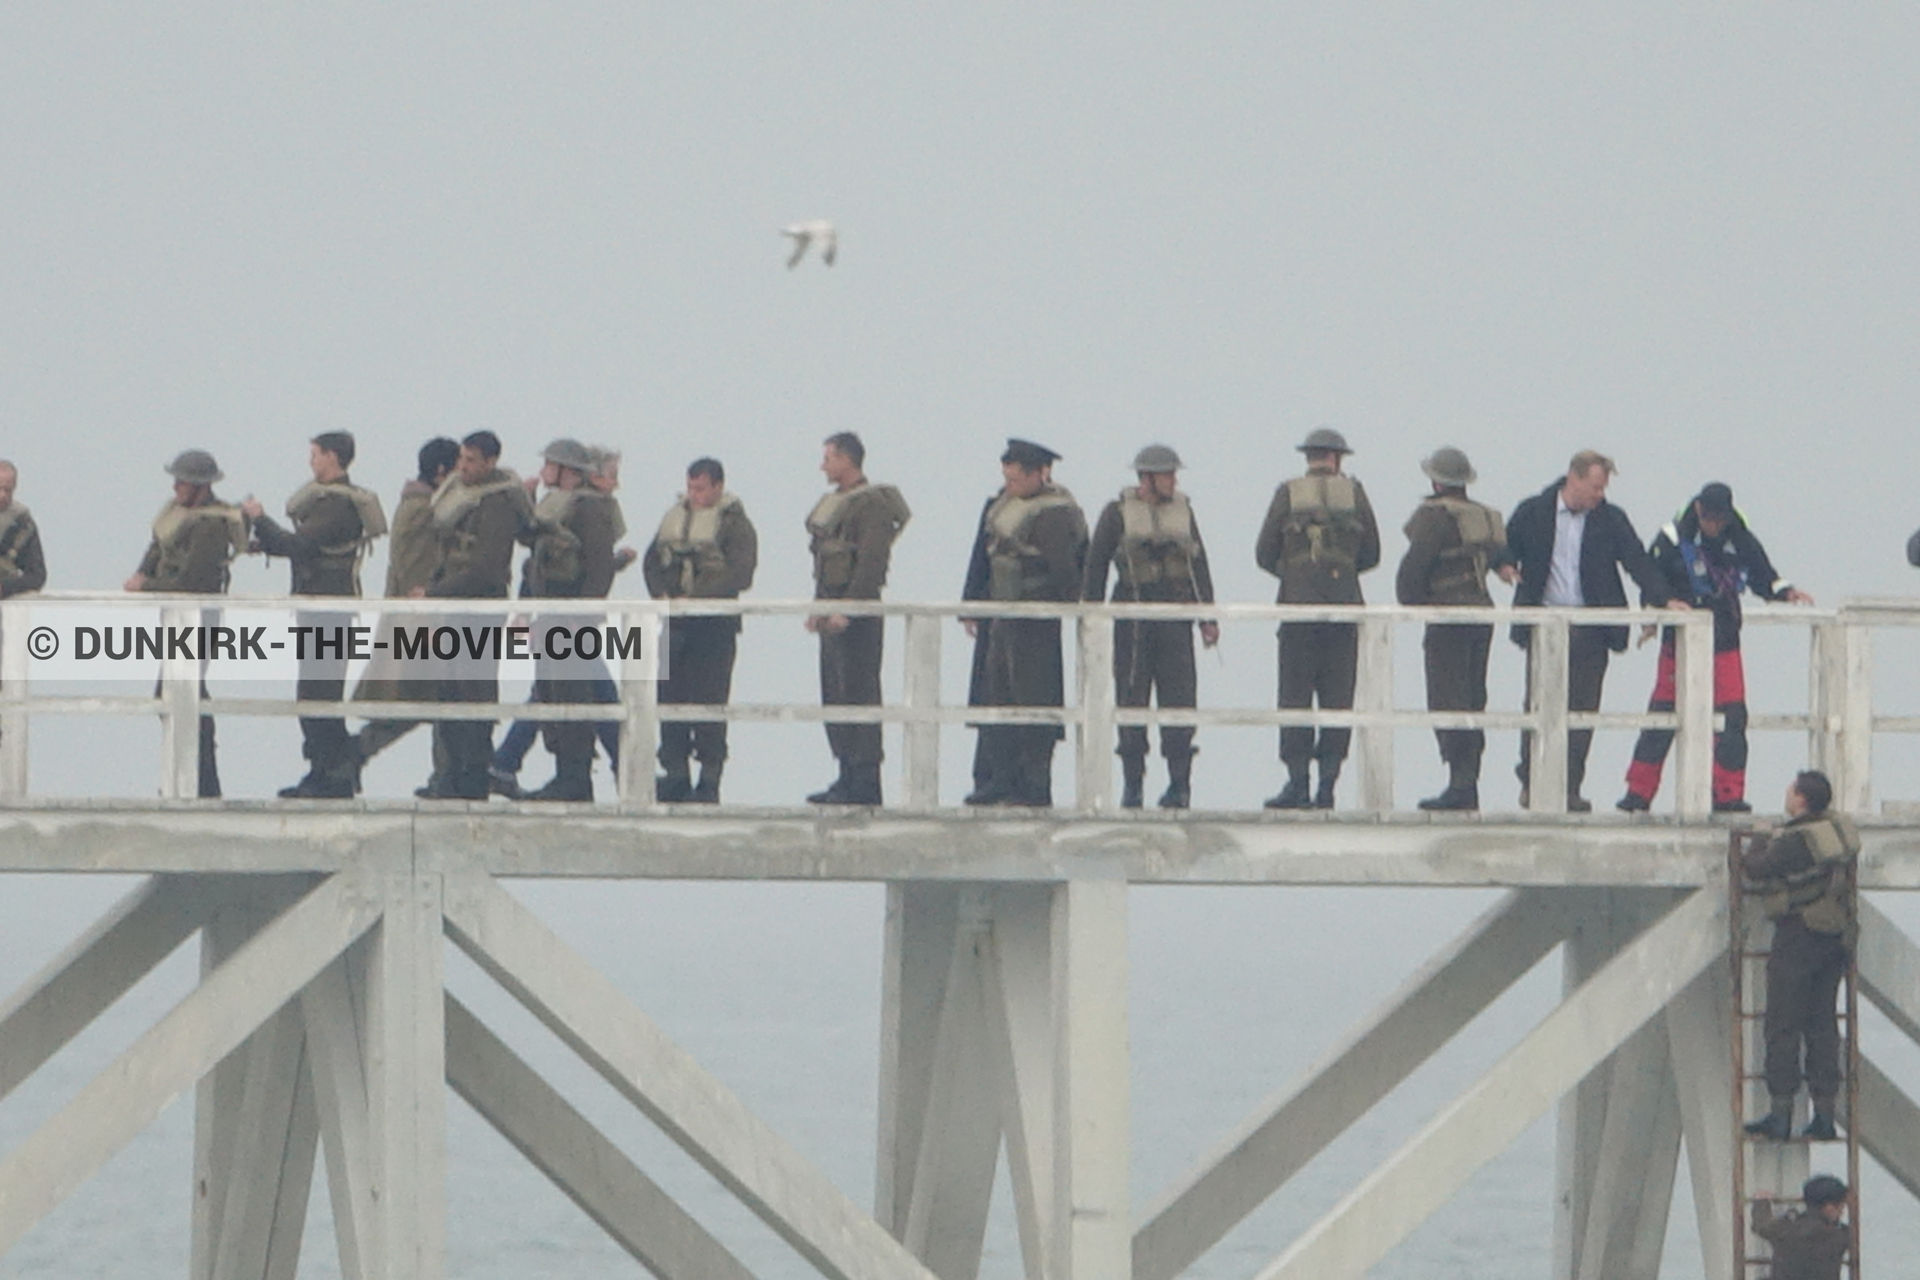 Picture with actor, grey sky, supernumeraries, EST pier, Christopher Nolan, technical team,  from behind the scene of the Dunkirk movie by Nolan